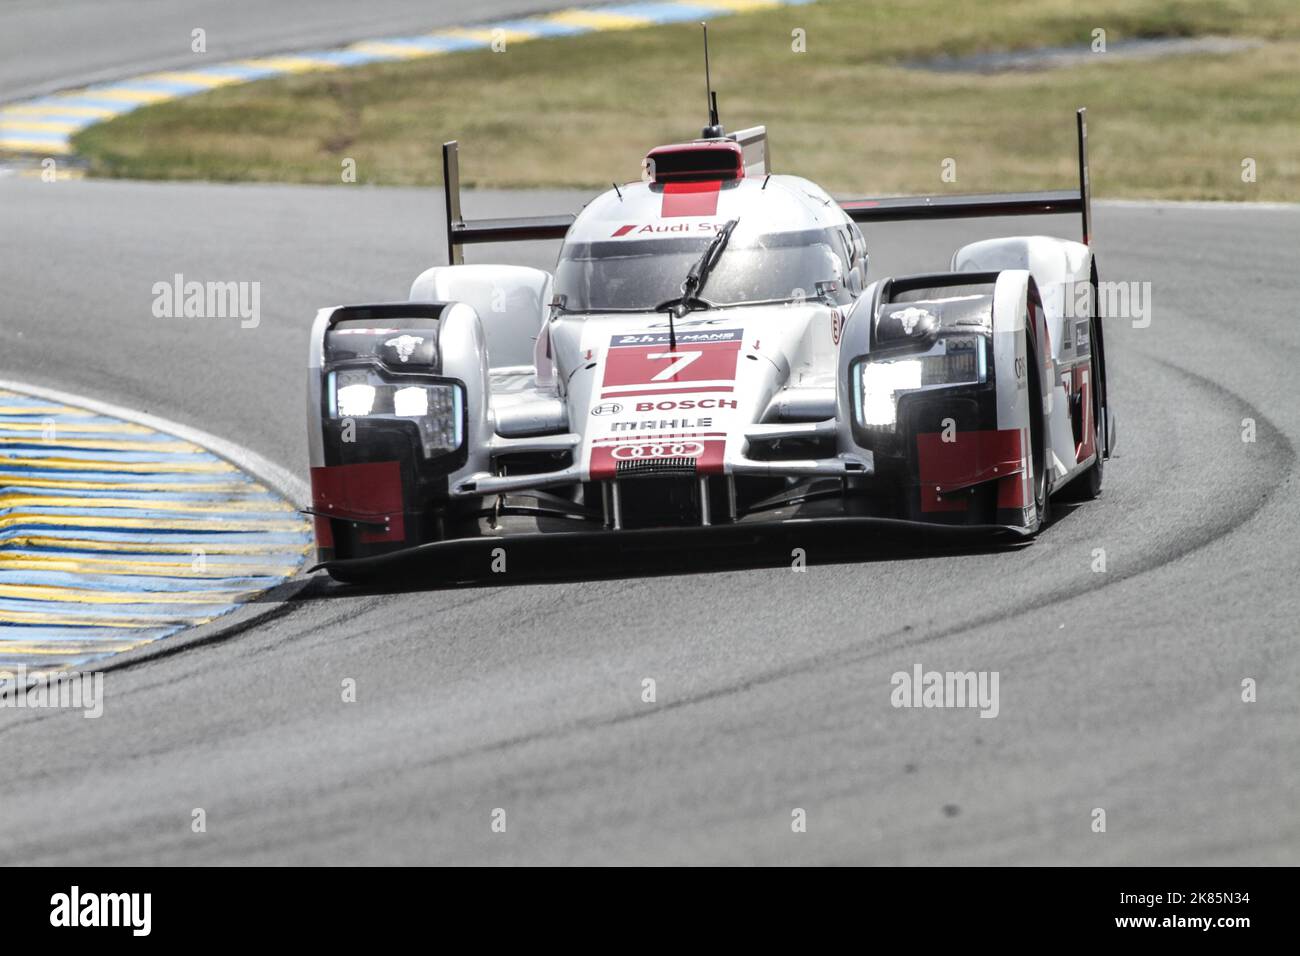 Audi le mans hi-res stock photography and images picture